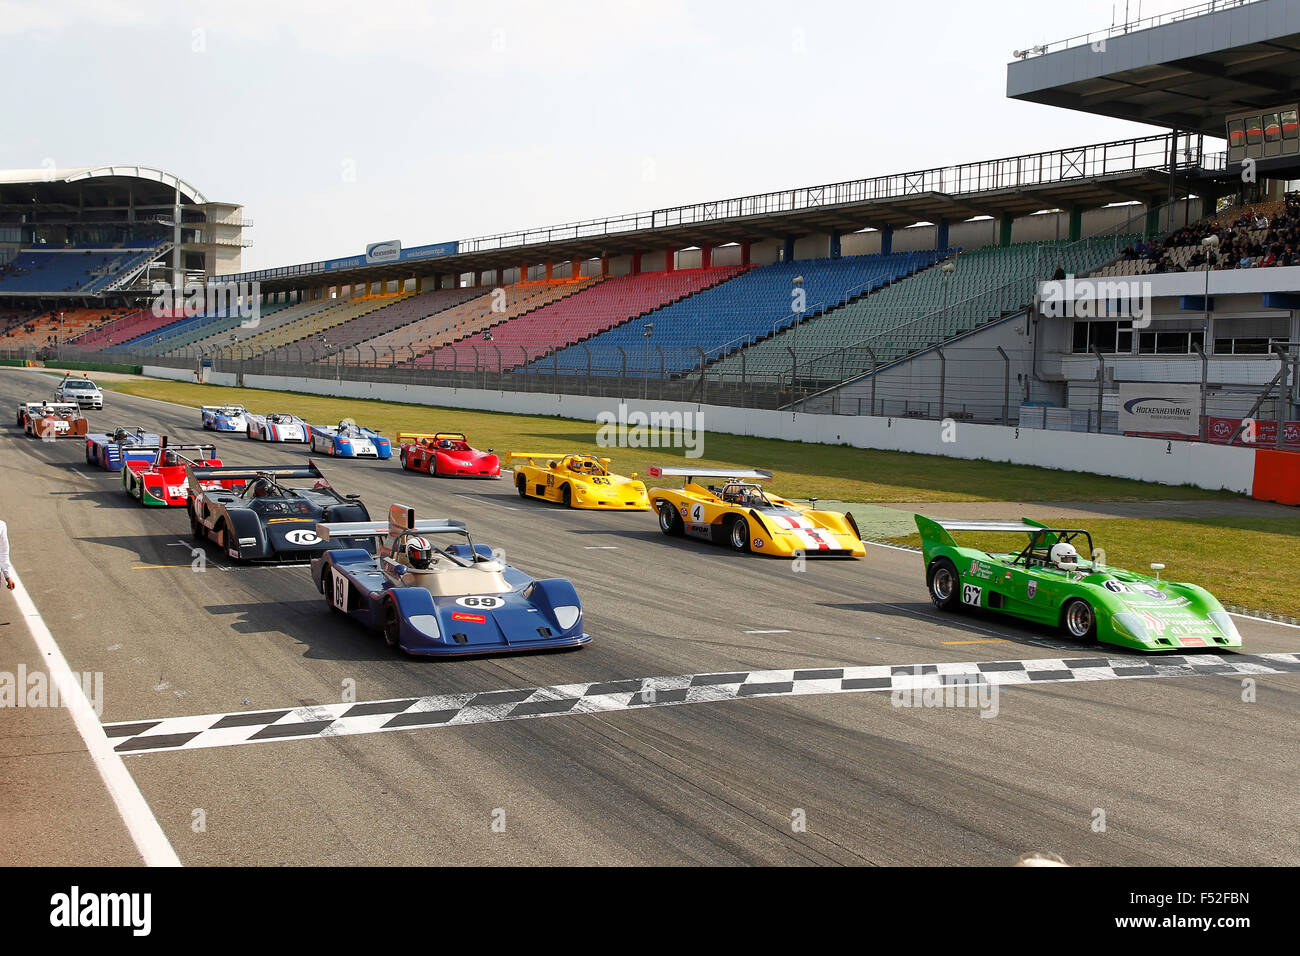 Brandless Racing Cars Race Track Illustration Stock Photo by